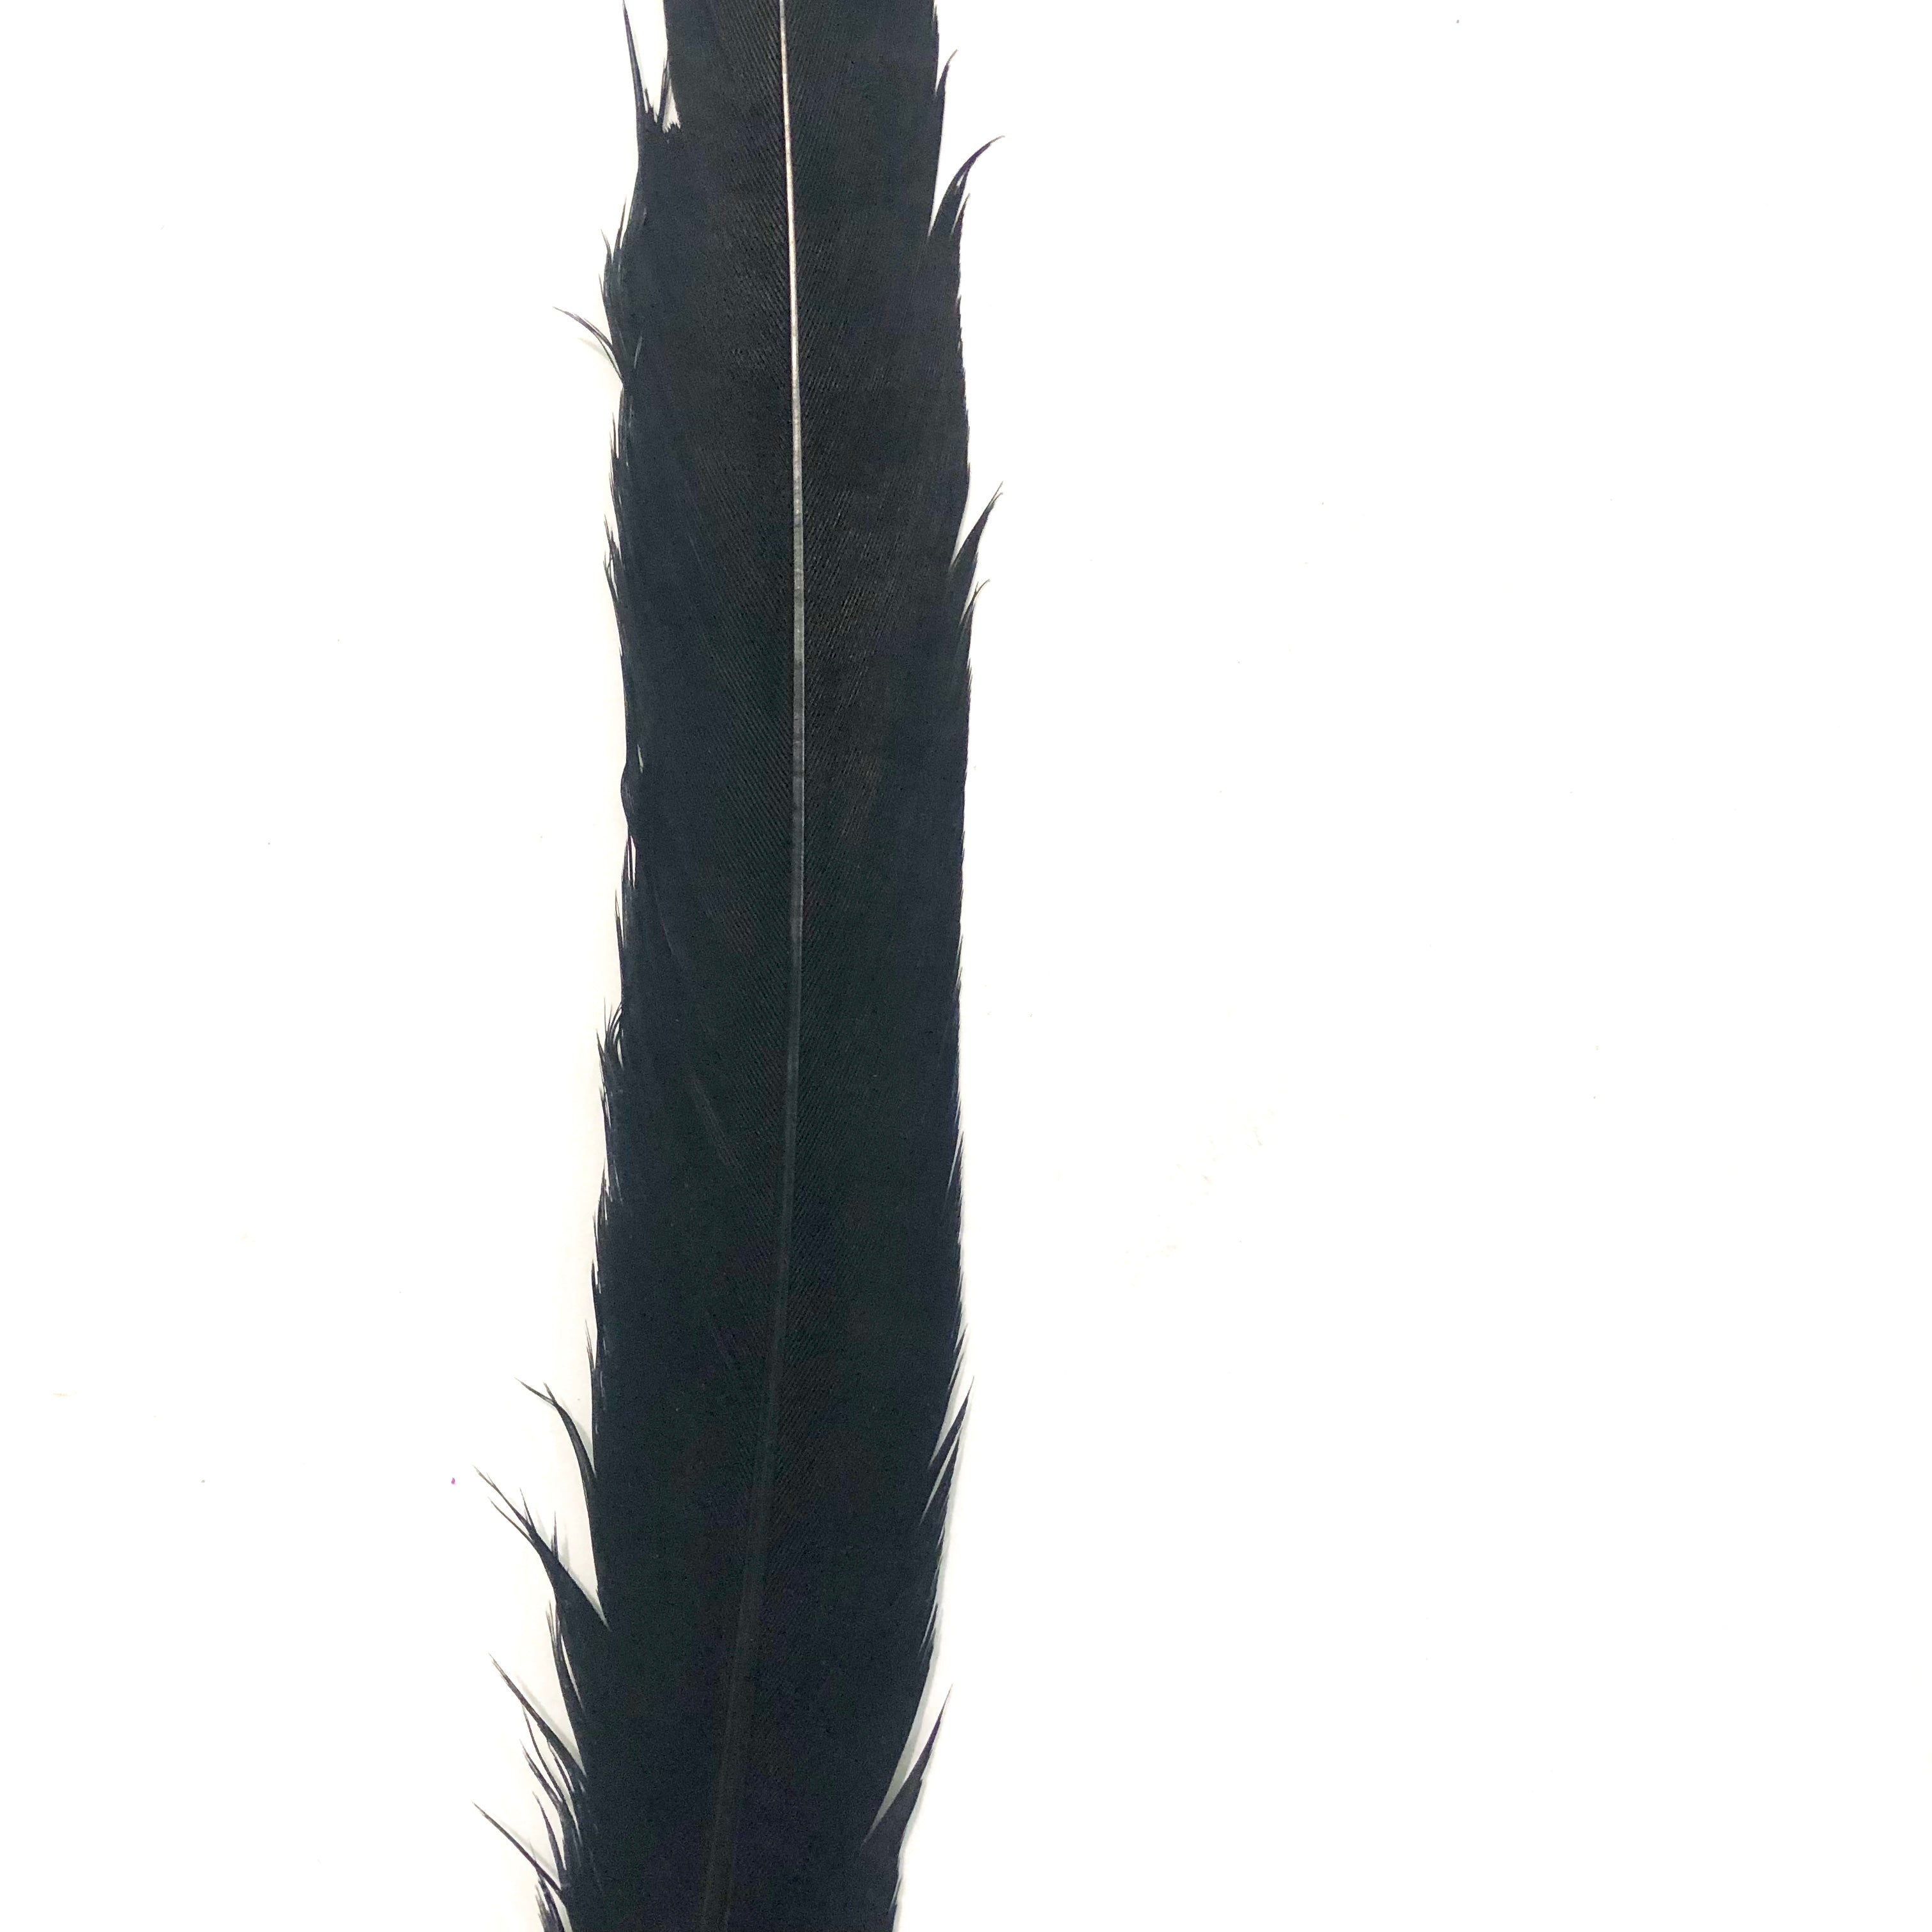 12" to 14" Reeves Pheasant Tail Feather - Black